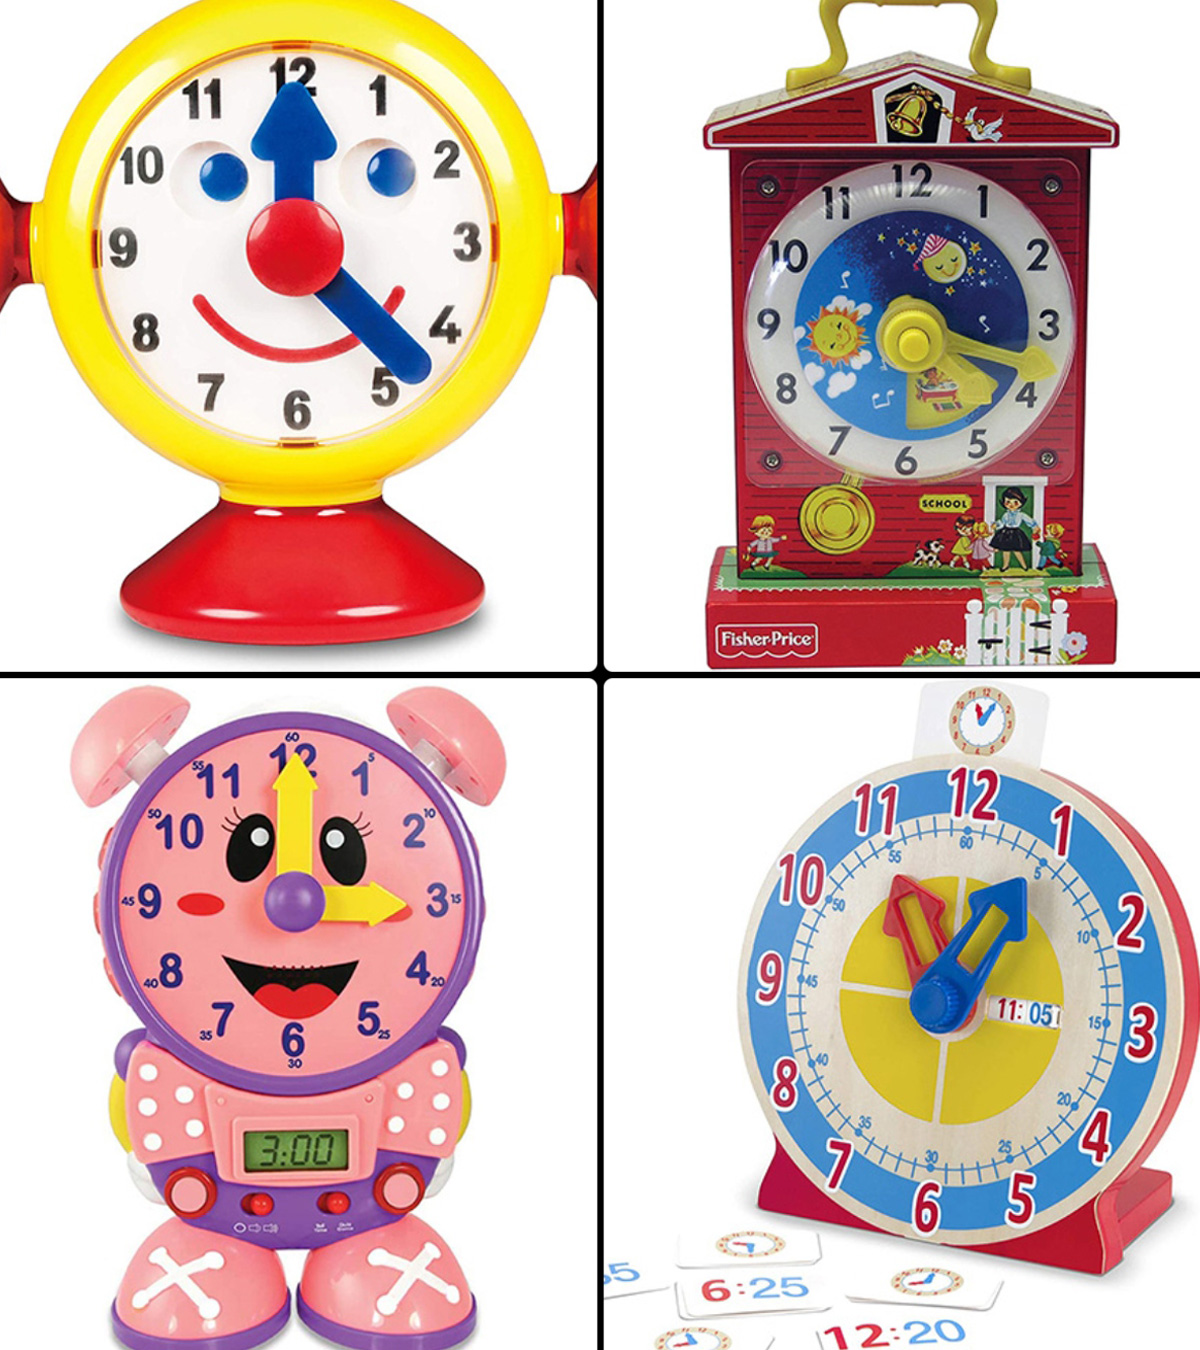 Baoblaze Multi-Color Wooden Time Learning Clock Toy School Learning Supplies for Kids 